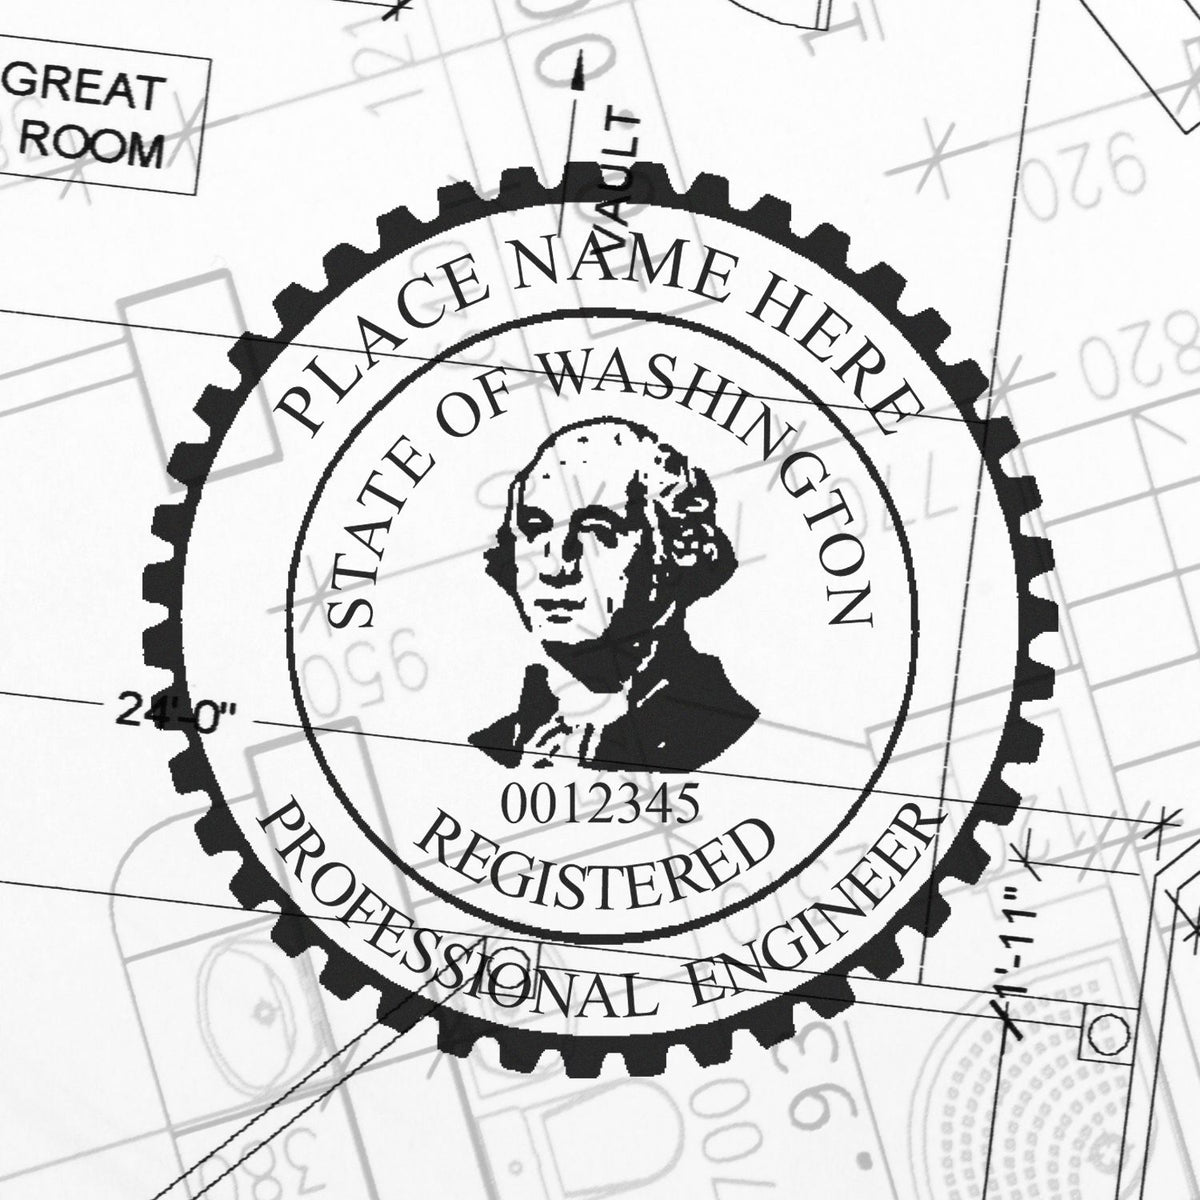 Another Example of a stamped impression of the Washington Professional Engineer Seal Stamp on a piece of office paper.